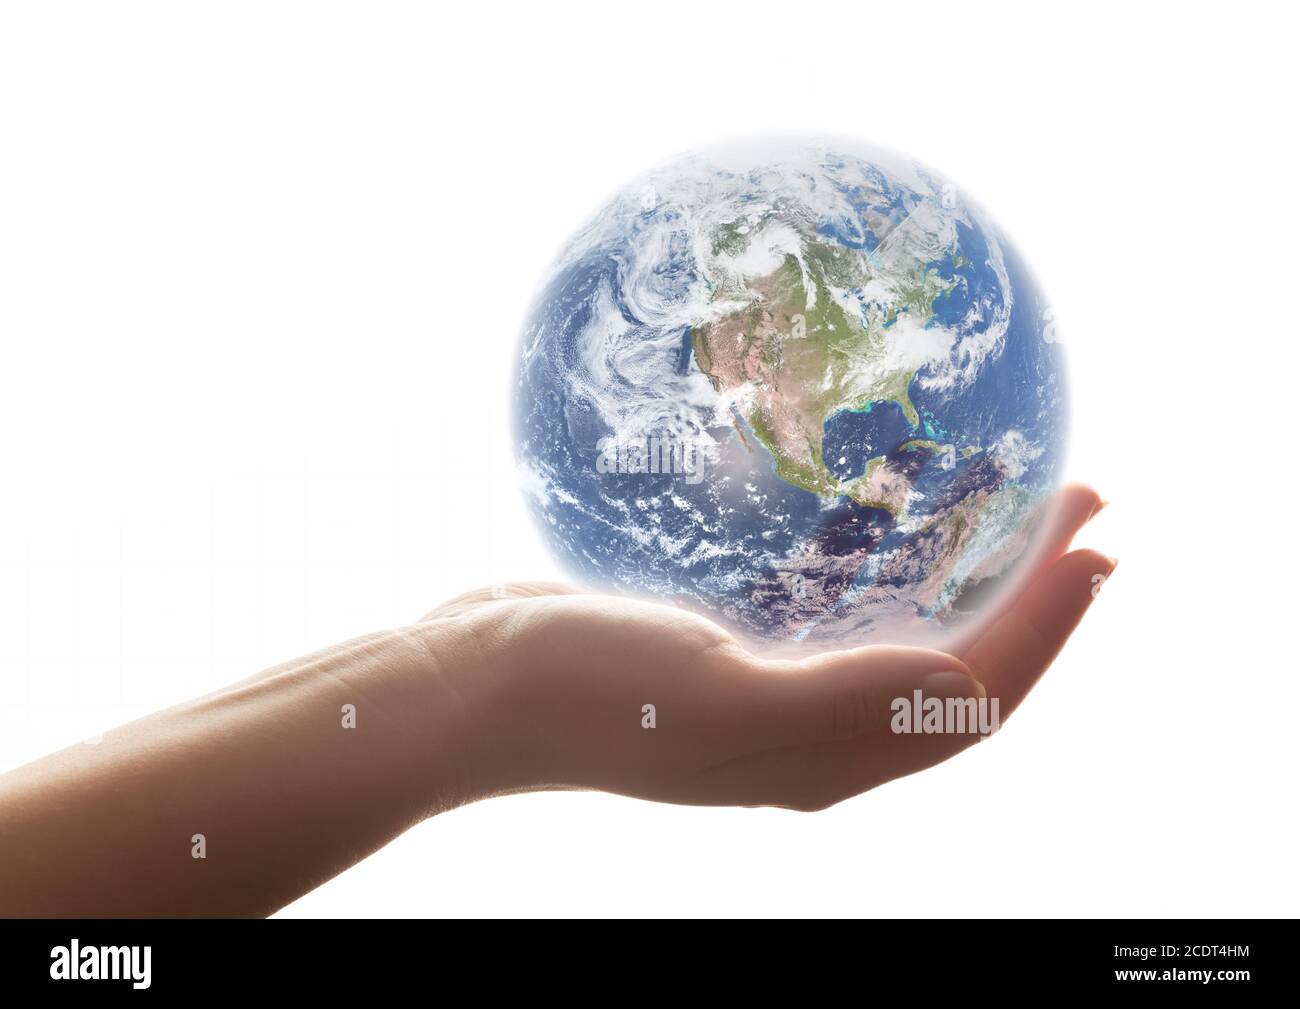 The earth shines in woman#39;s hand. Concepts of save the world, environment etc. Stock Photo